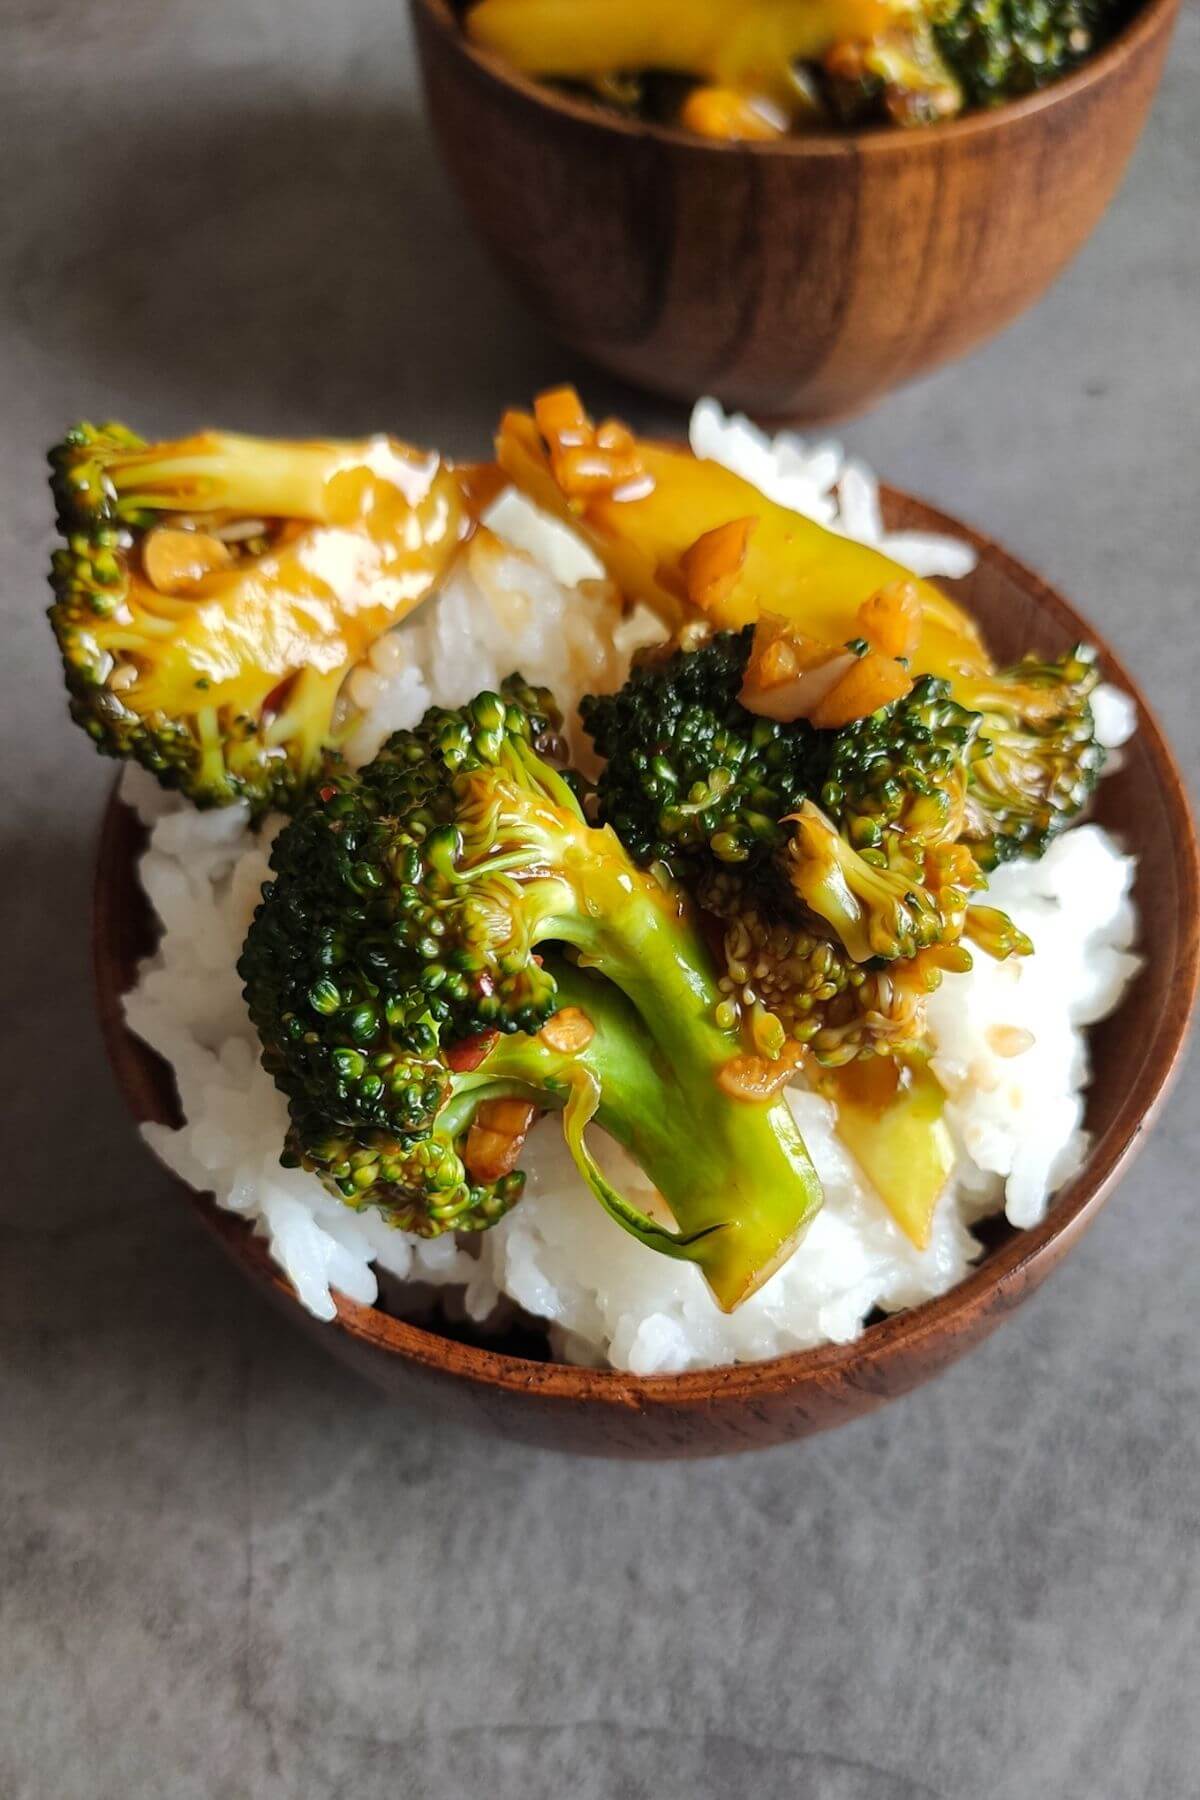 Ginger garlic broccoli served on top of cooked rice in a wooden bowl and another bowl of broccoli in the backgrounf